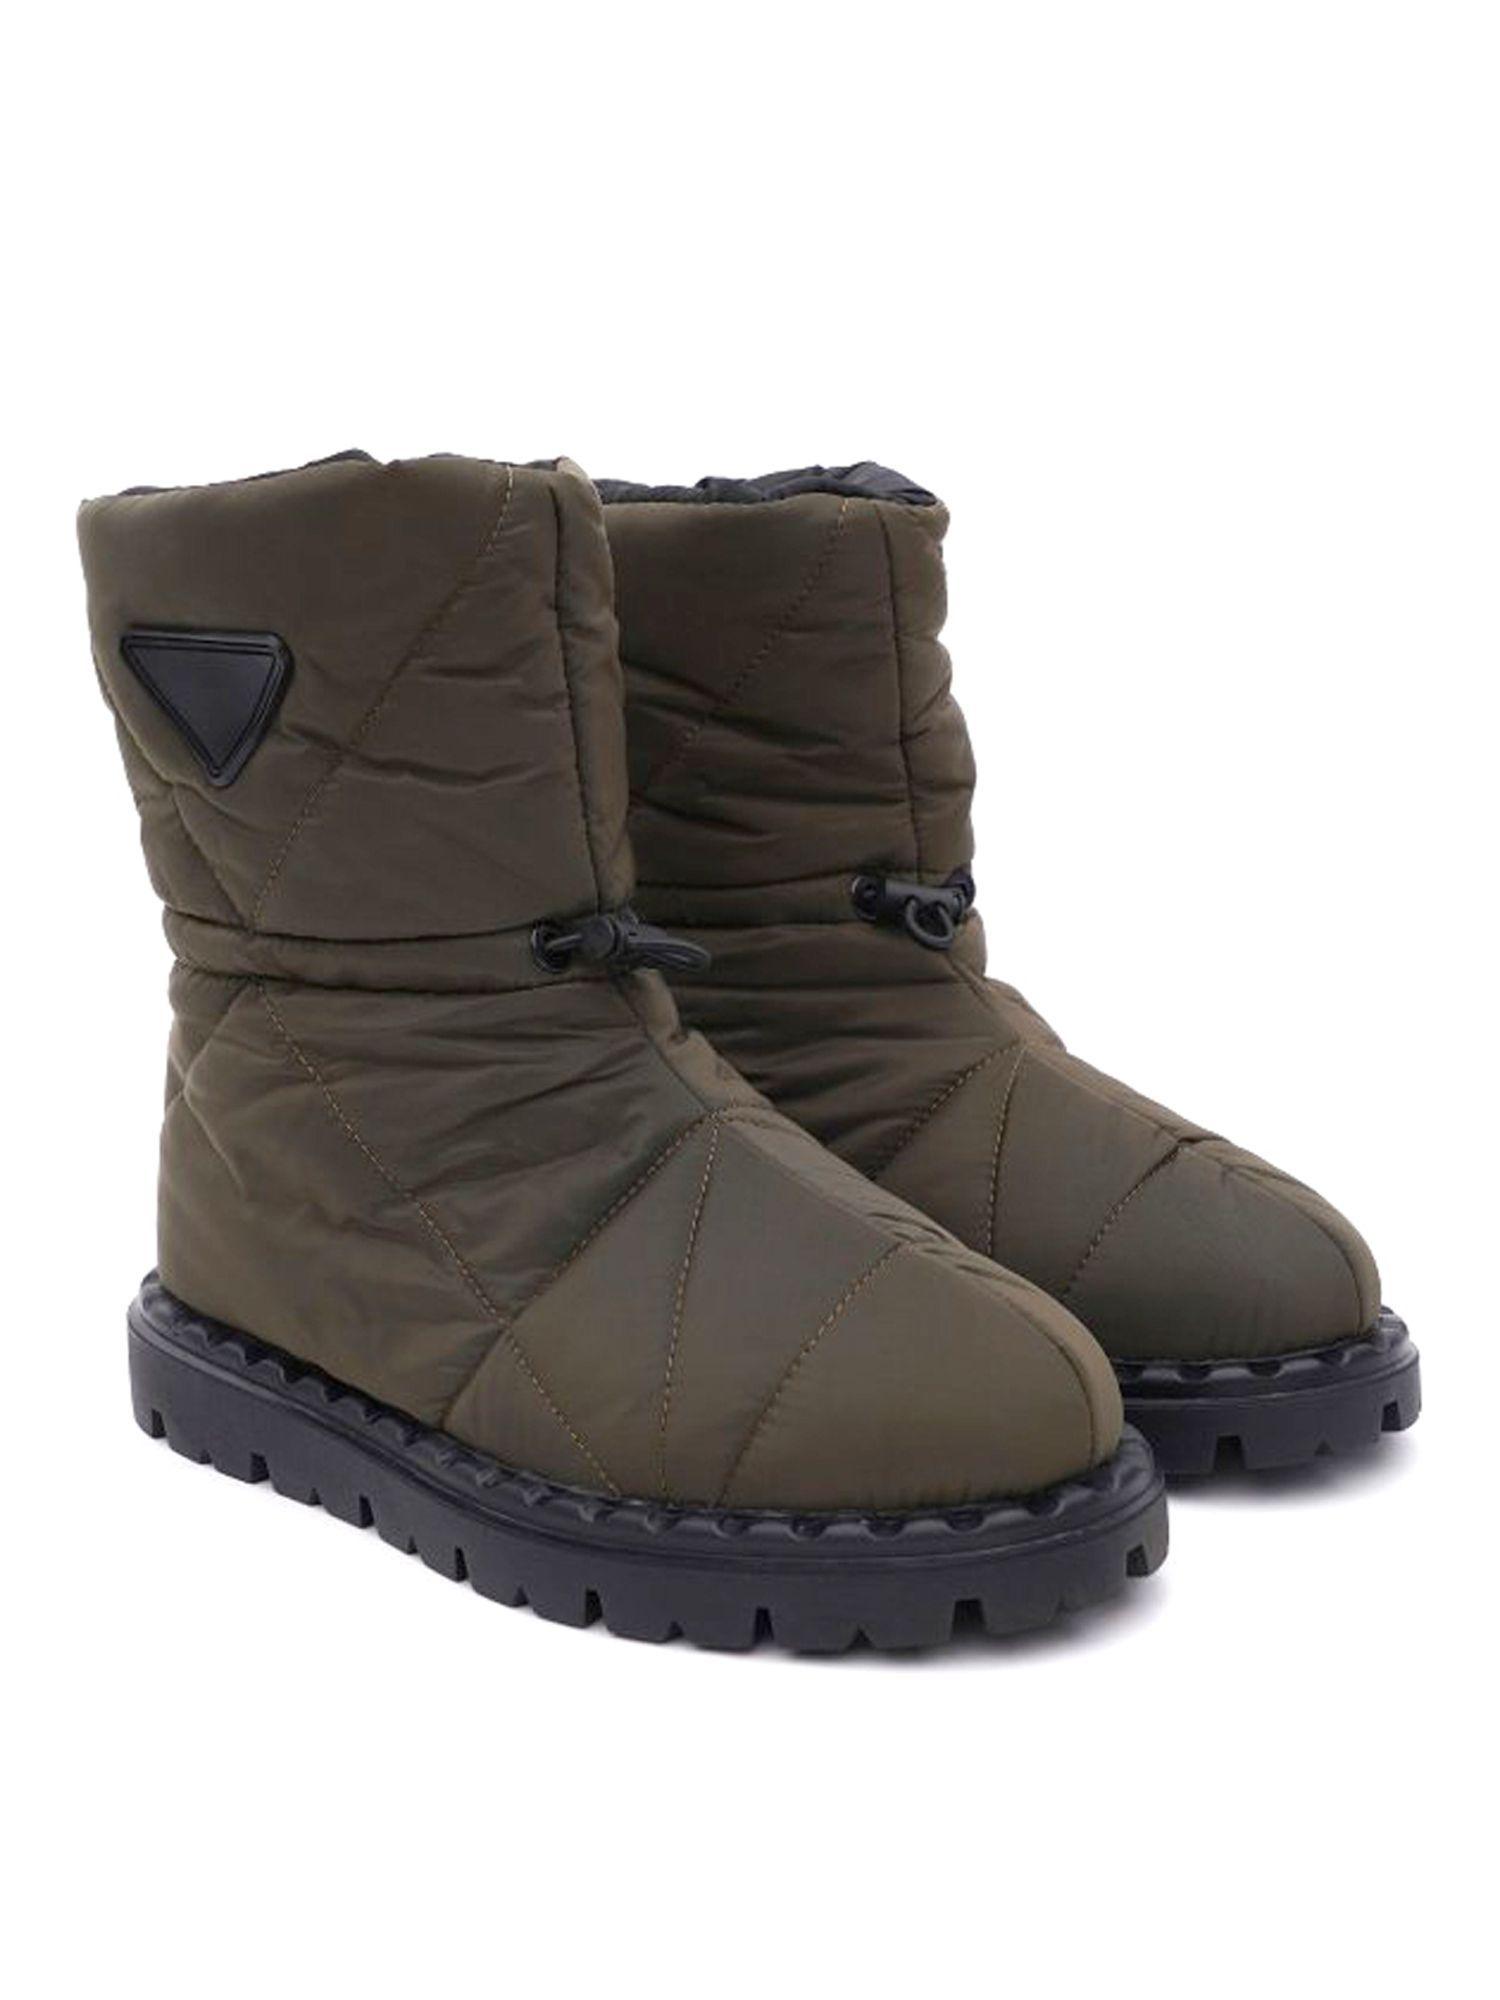 solid military green girls winter snow boots